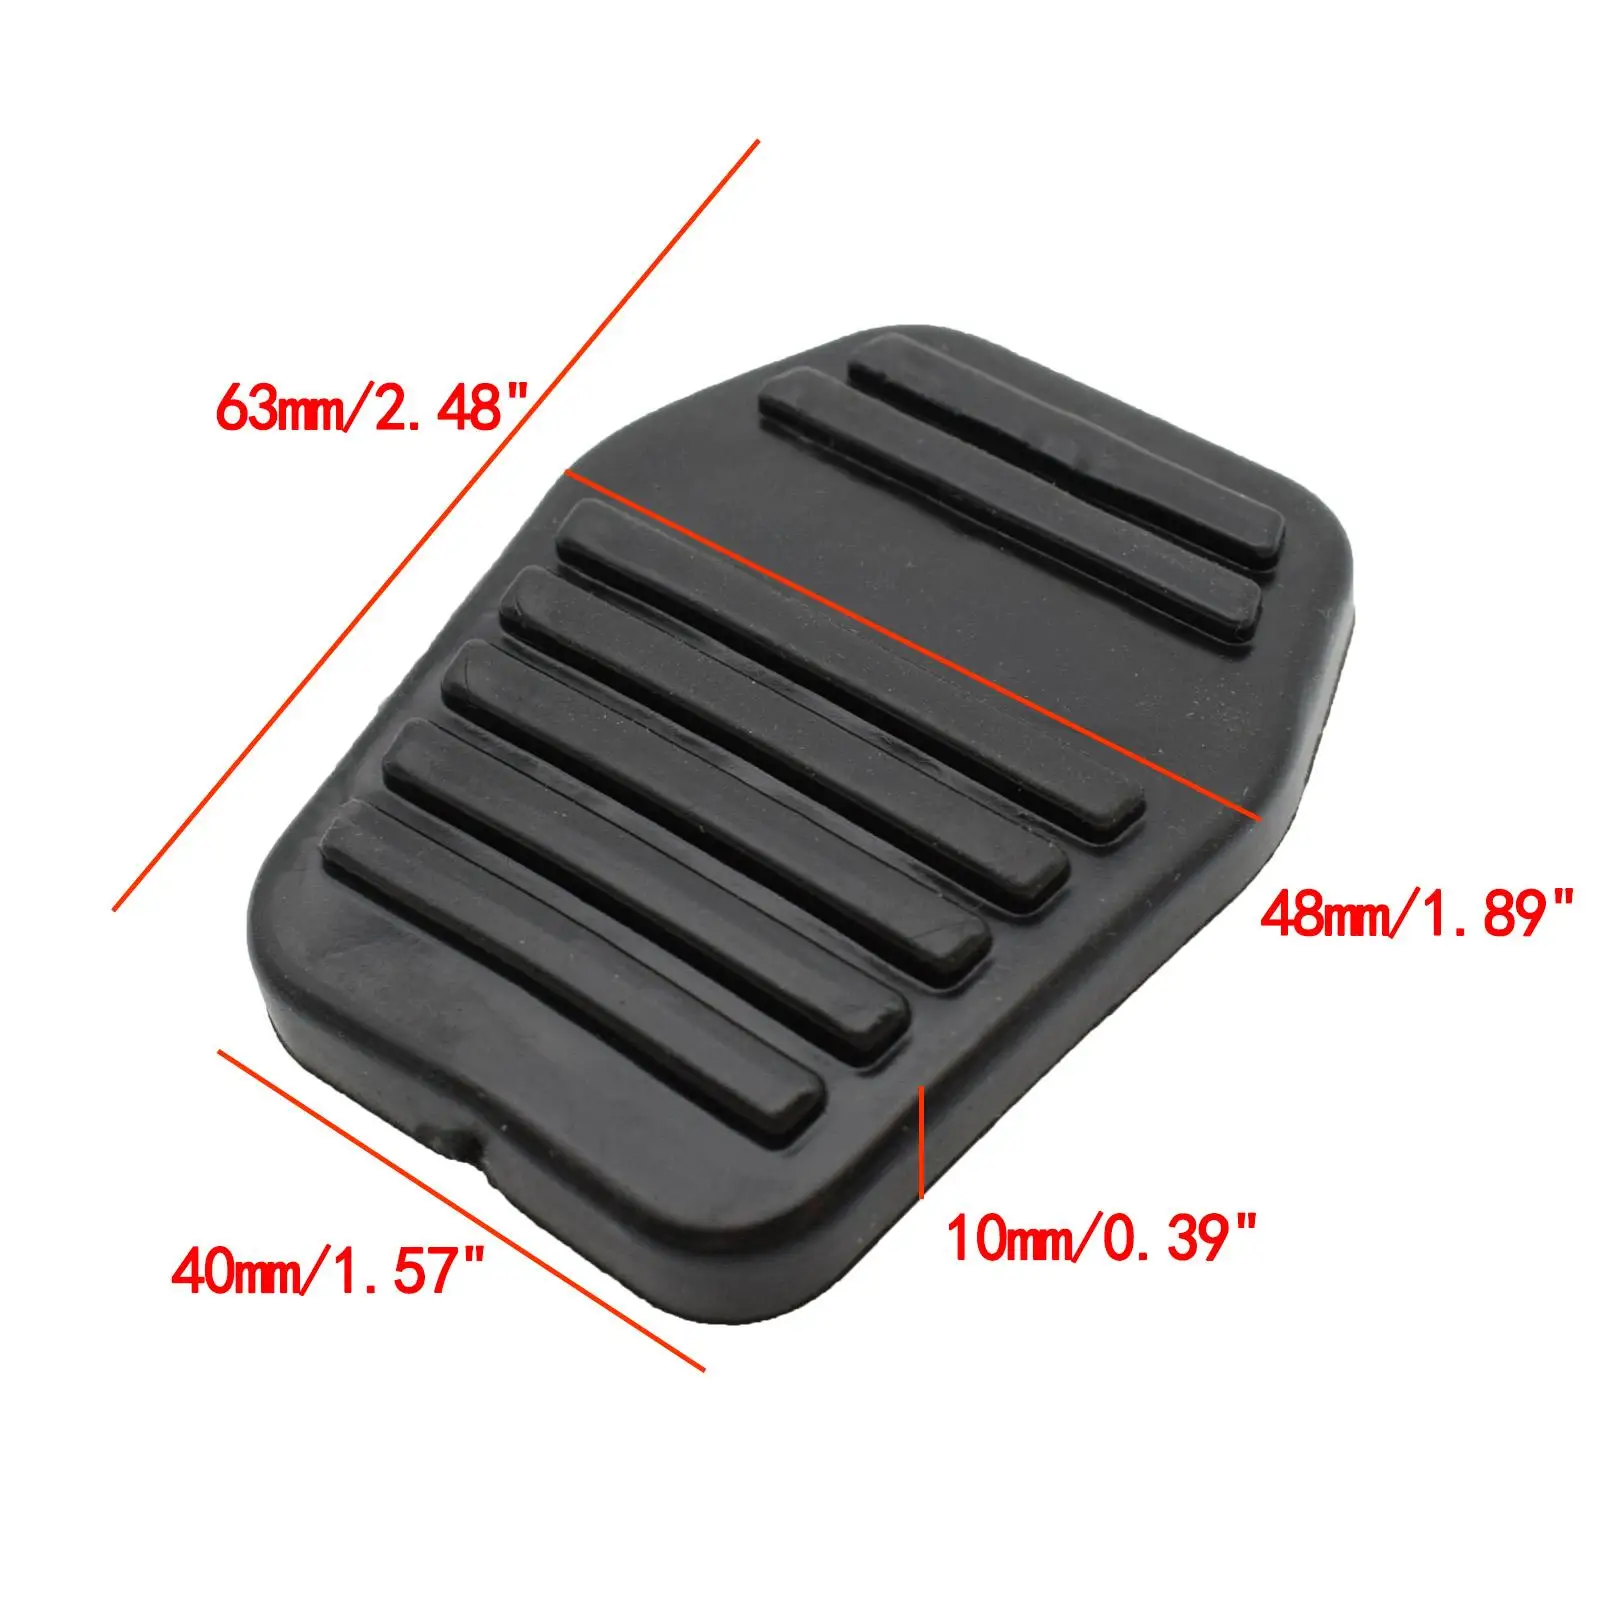 2x Clutch Brake Pedal Rubber Pad Cover Car For Ford Transit MK6 MK7 00-14 New SS